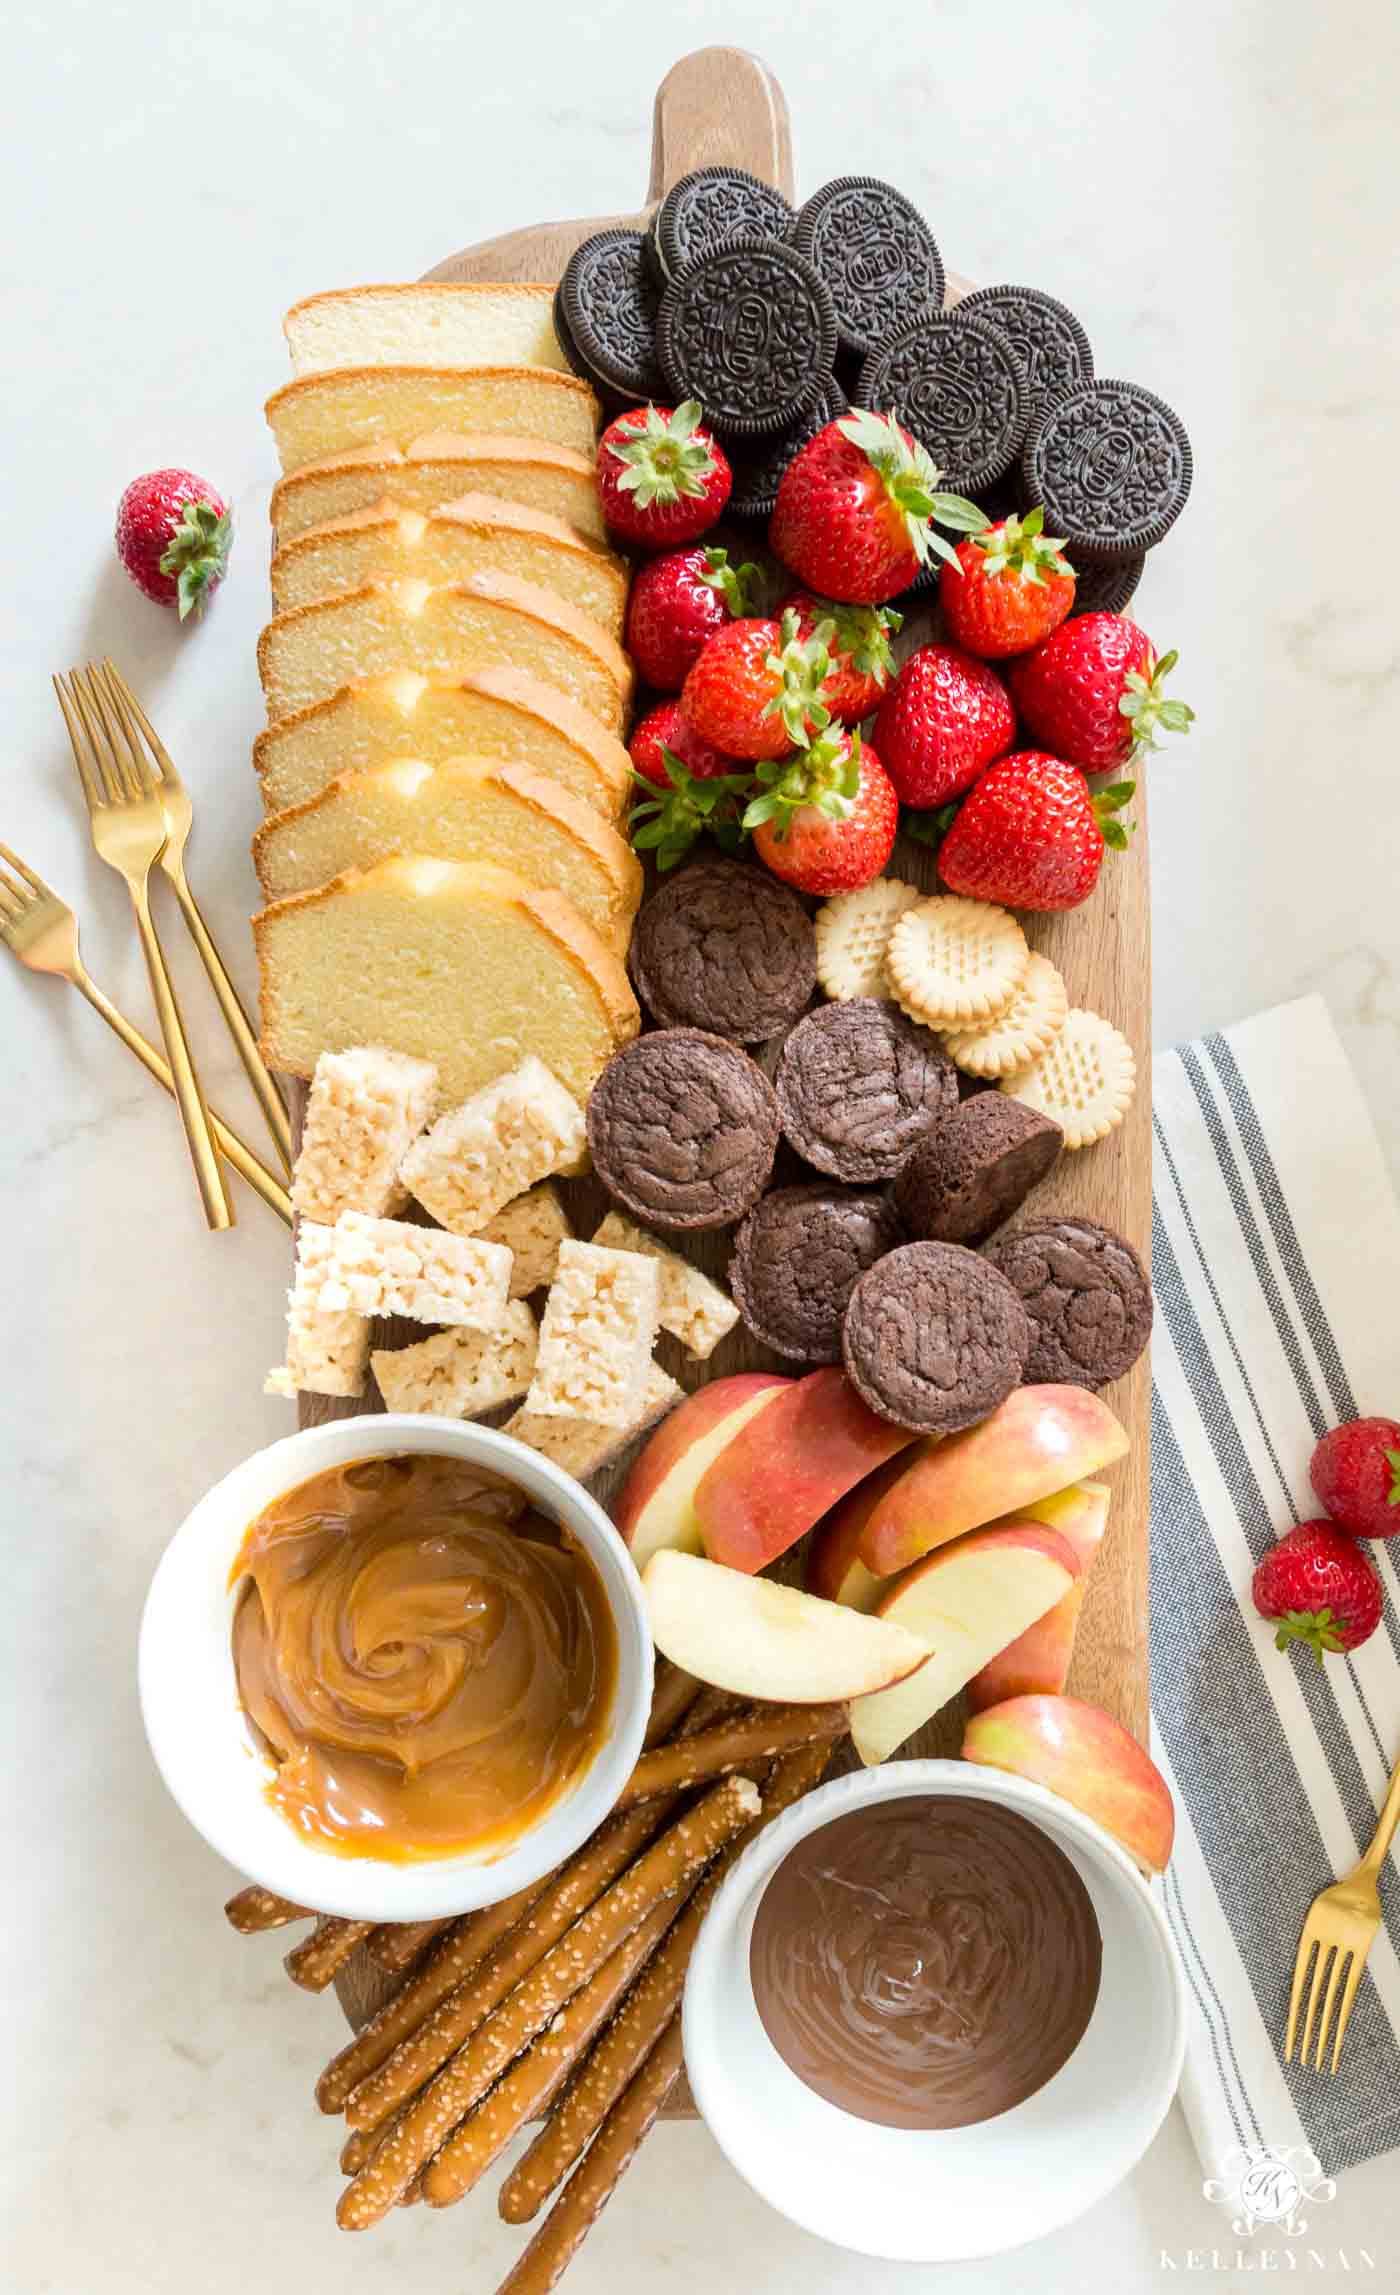 Chocolate and Caramel Fondue Dippers